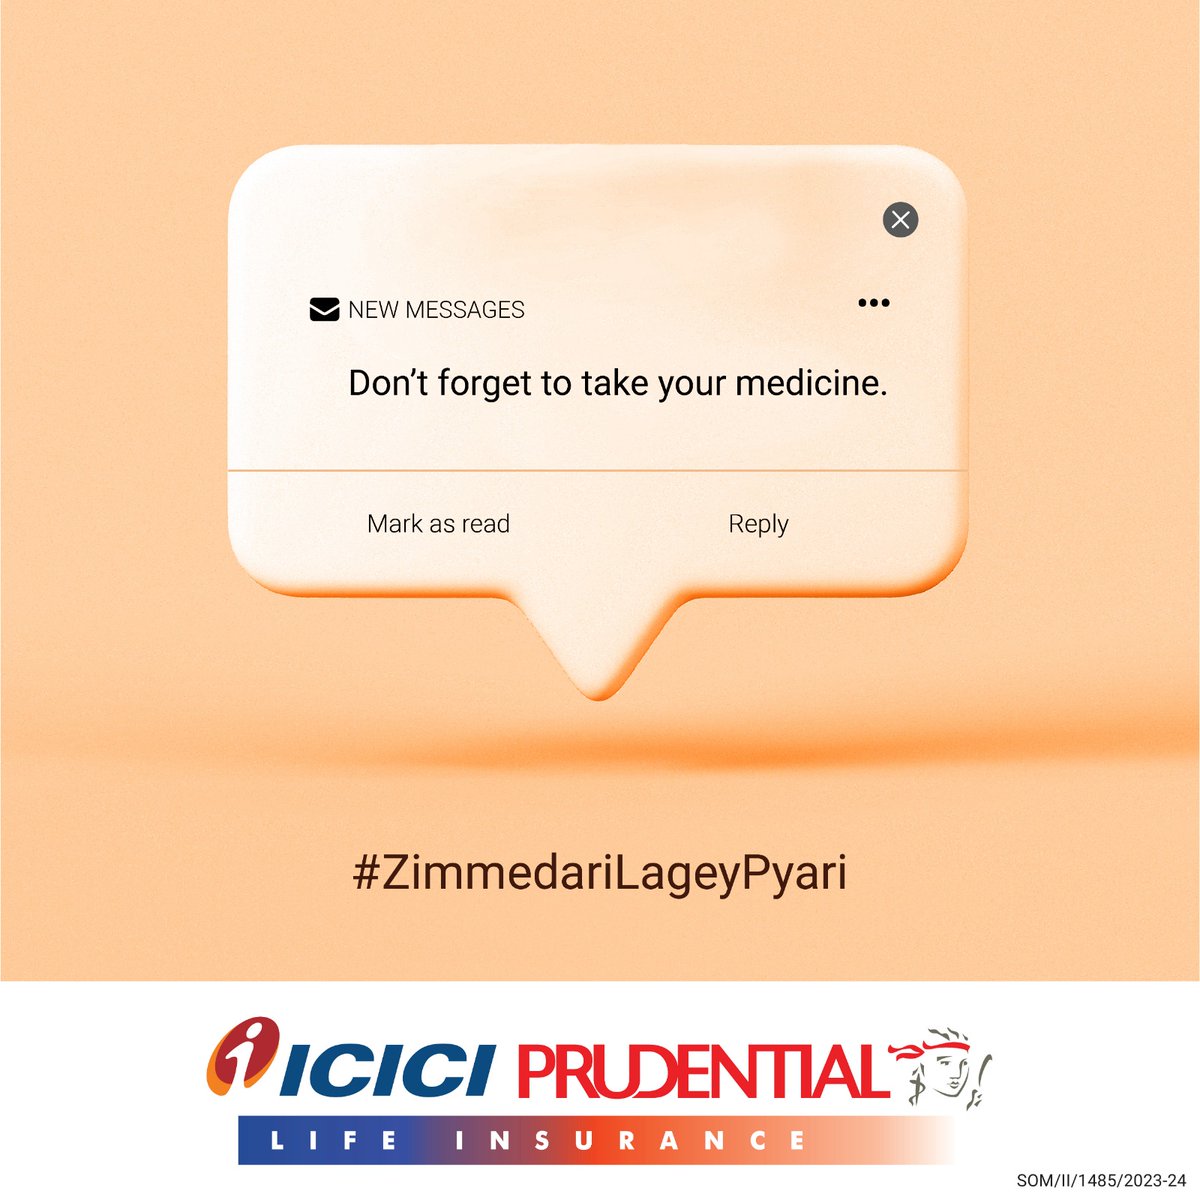 Life's journey brings countless responsibilities. ICICI Prudential Life celebrates the responsibilities that help create a secure future for you and your loved ones. Visit: shorturl.at/kJOTX Disclaimer: bit.ly/3bARCBP